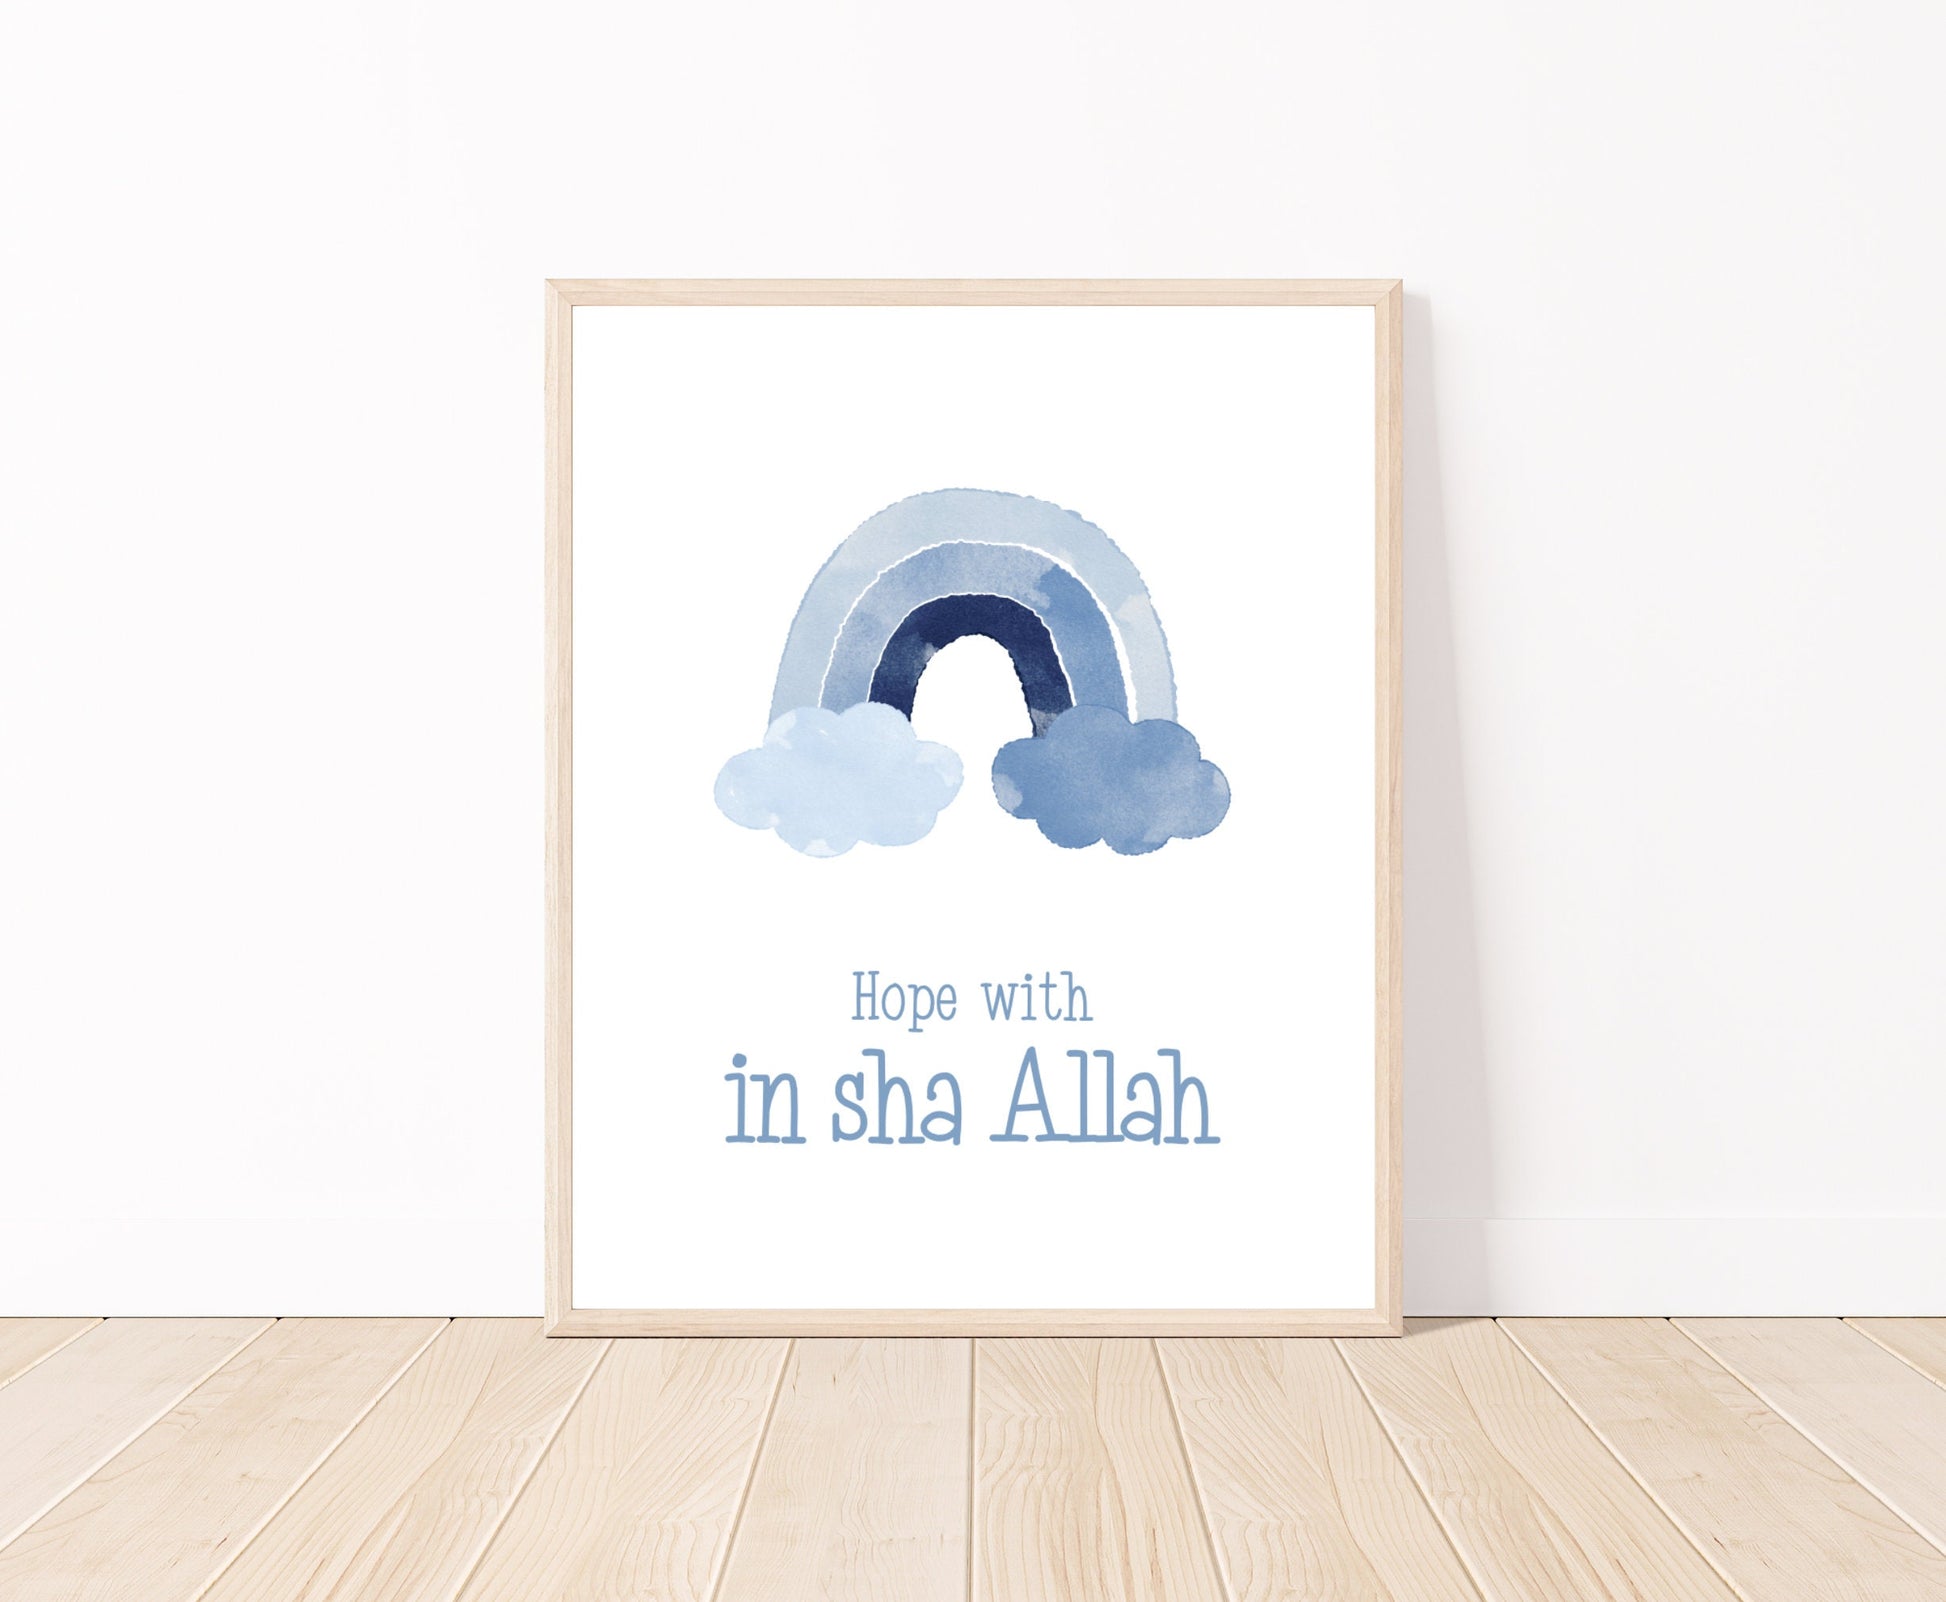 A digital poster that is placed on a white wall and parquet flooring shows a baby blue rainbow with “Hope with In Sha Allah” written just below it.